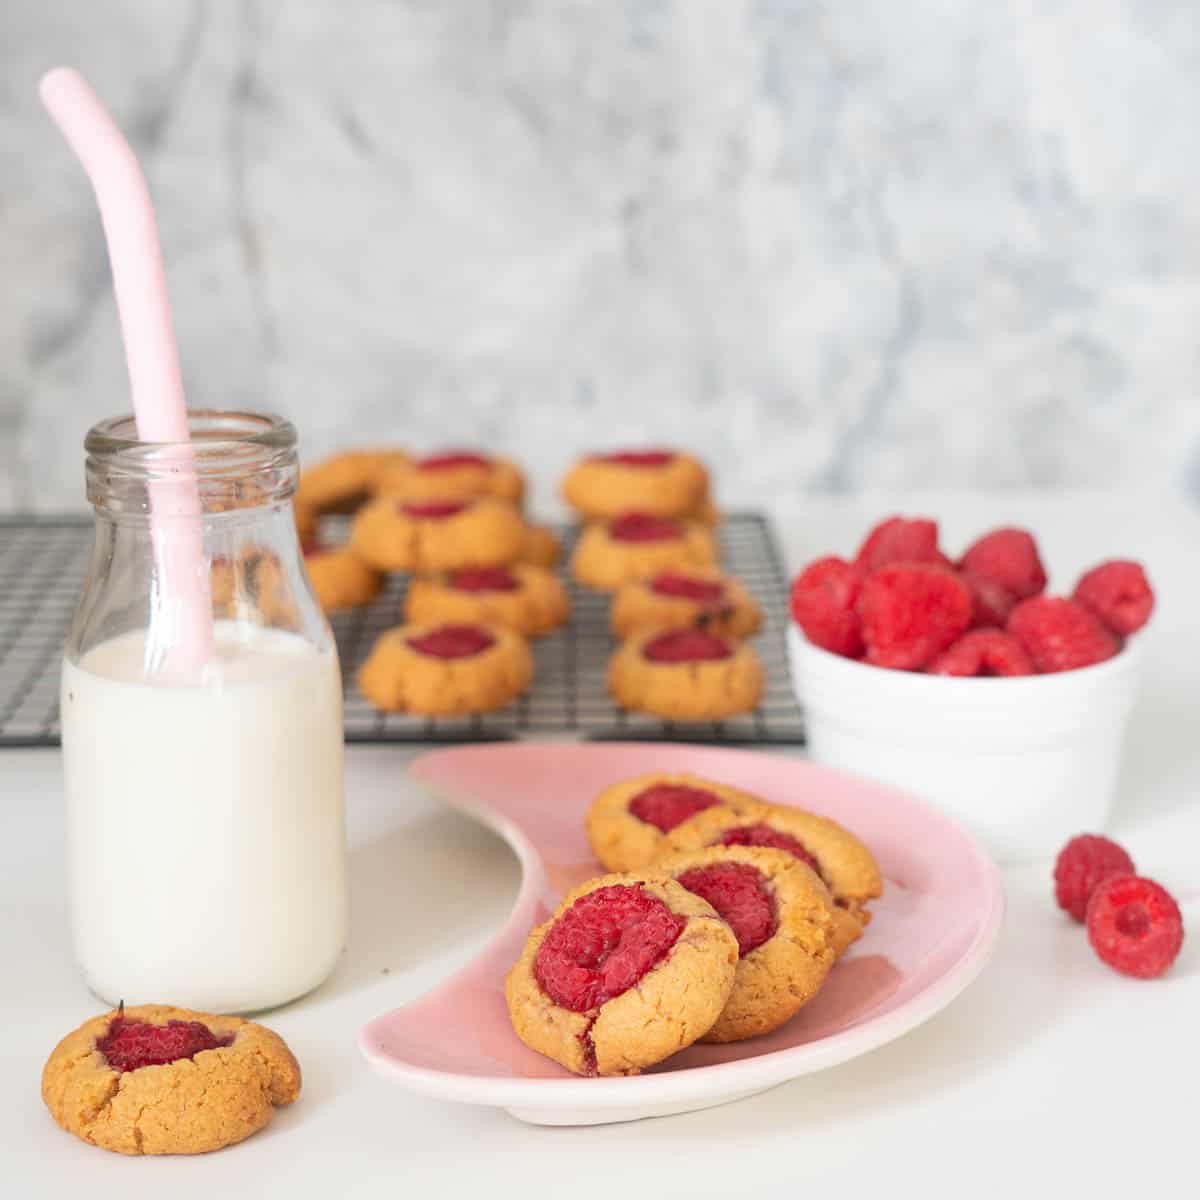 Three raspberry thumbprint cookies on a pink crescent shaped plate with a small bottle of milk to the side.